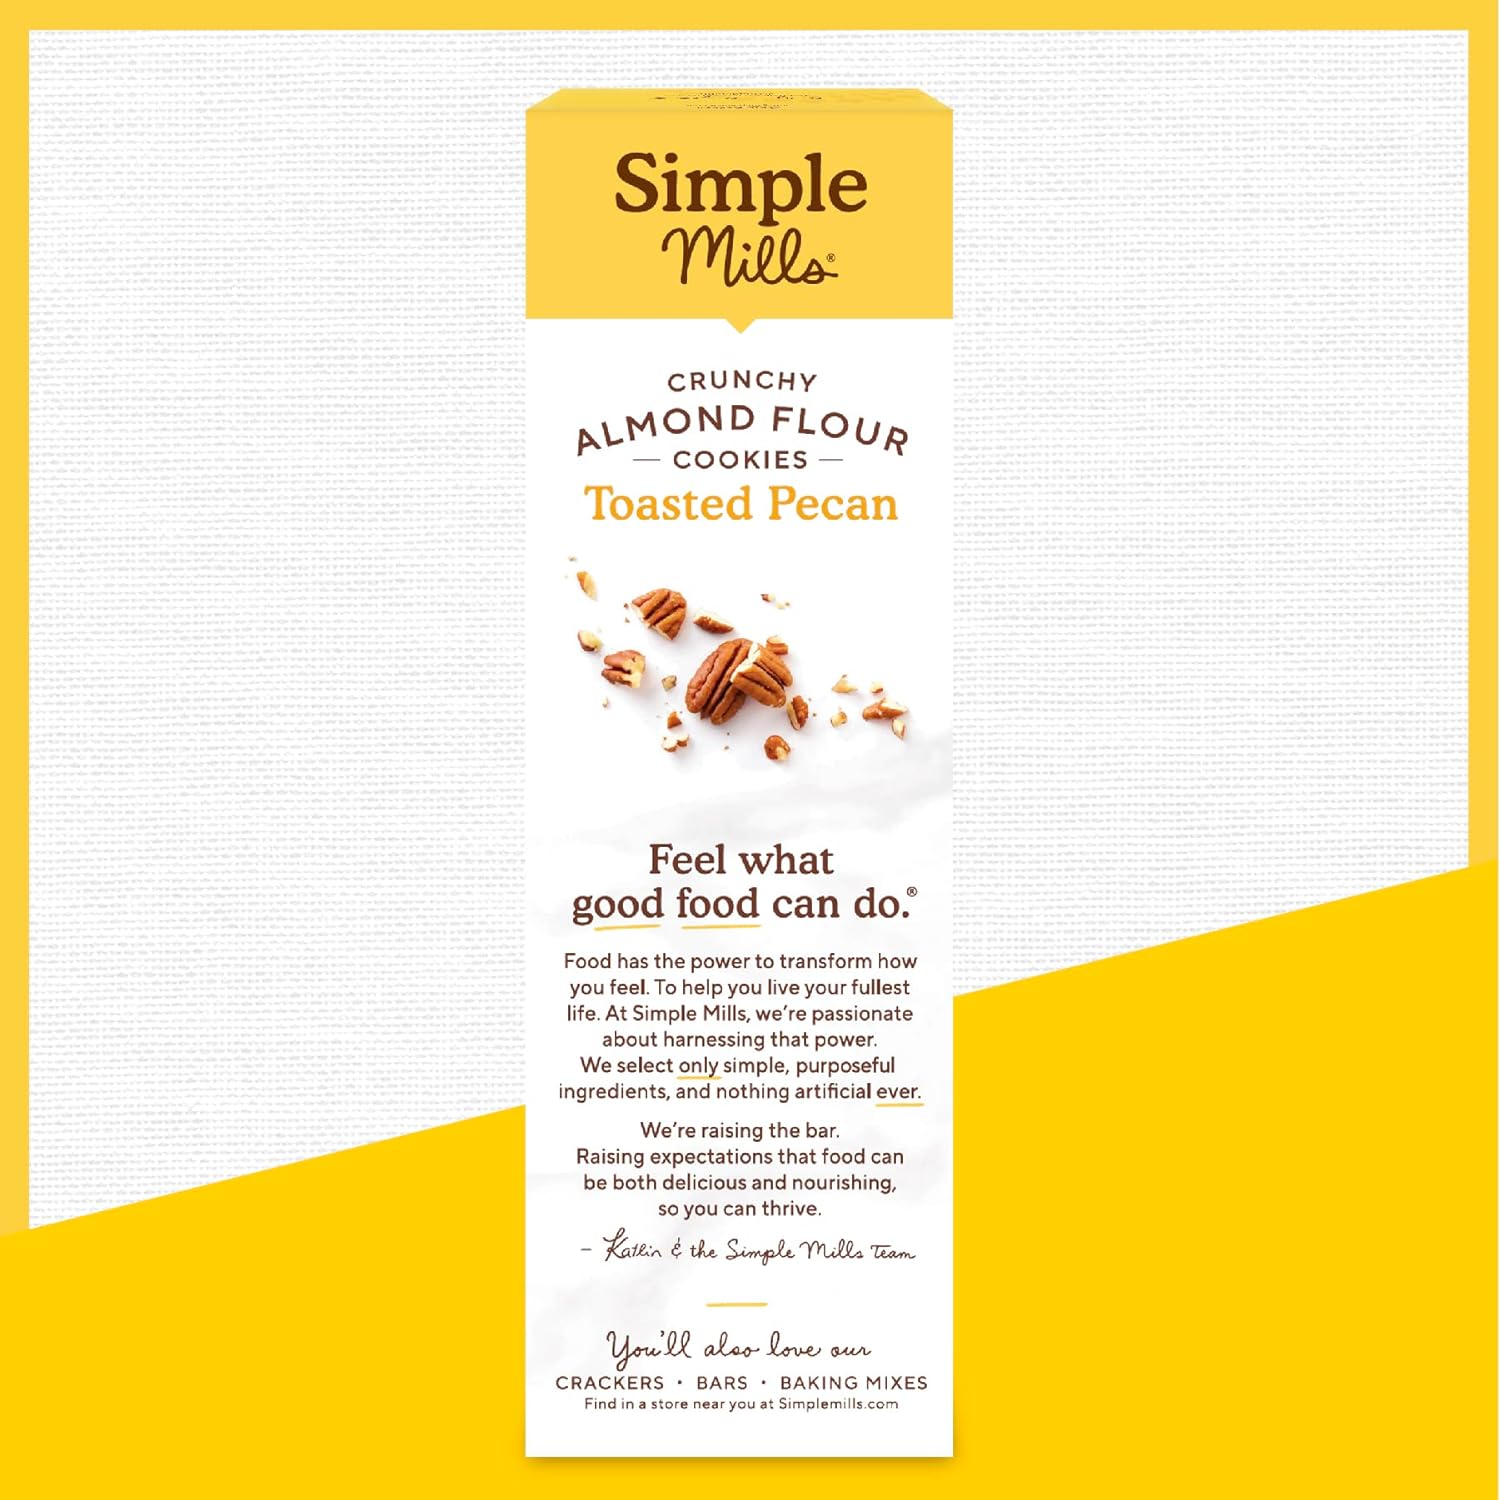 Simple Mills Almond Flour Crunchy Cookies, Toasted Pecan - Gluten Free, Vegan, Healthy Snacks, Made with Organic Coconut Oil, 5.5 Ounce (Pack of 6) : Grocery & Gourmet Food